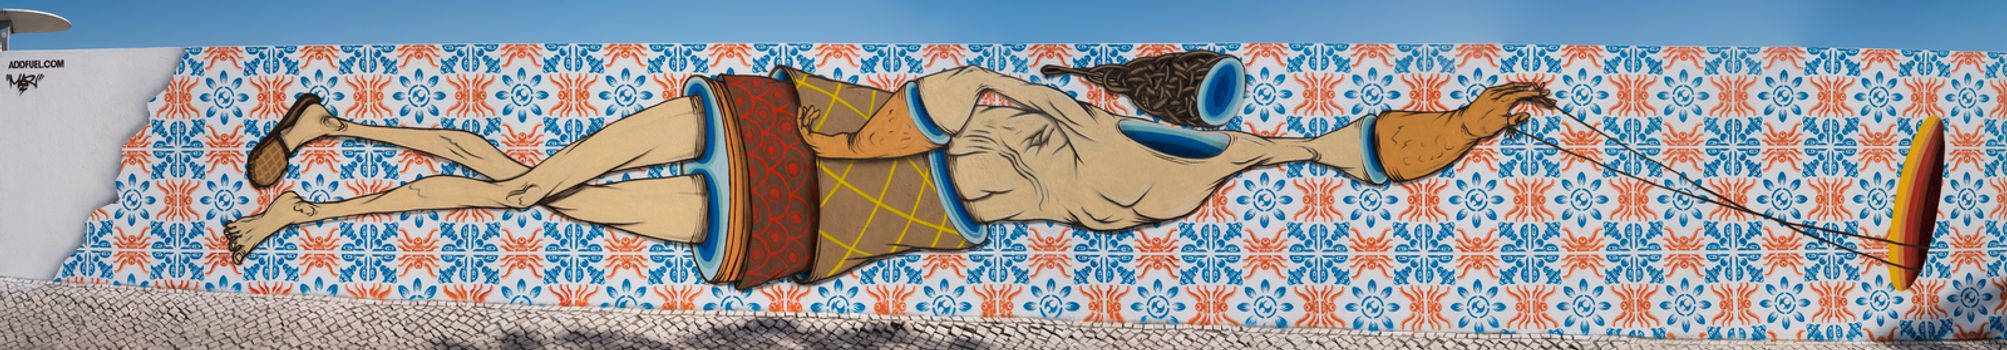 OVAR, PORTUGAL - AUGUST 10, 2015: Wall one panorama with painted Azulejo tiles by graffiti artists Add Fuel and gonçaloMAR during Festa'15 festival in 2015.